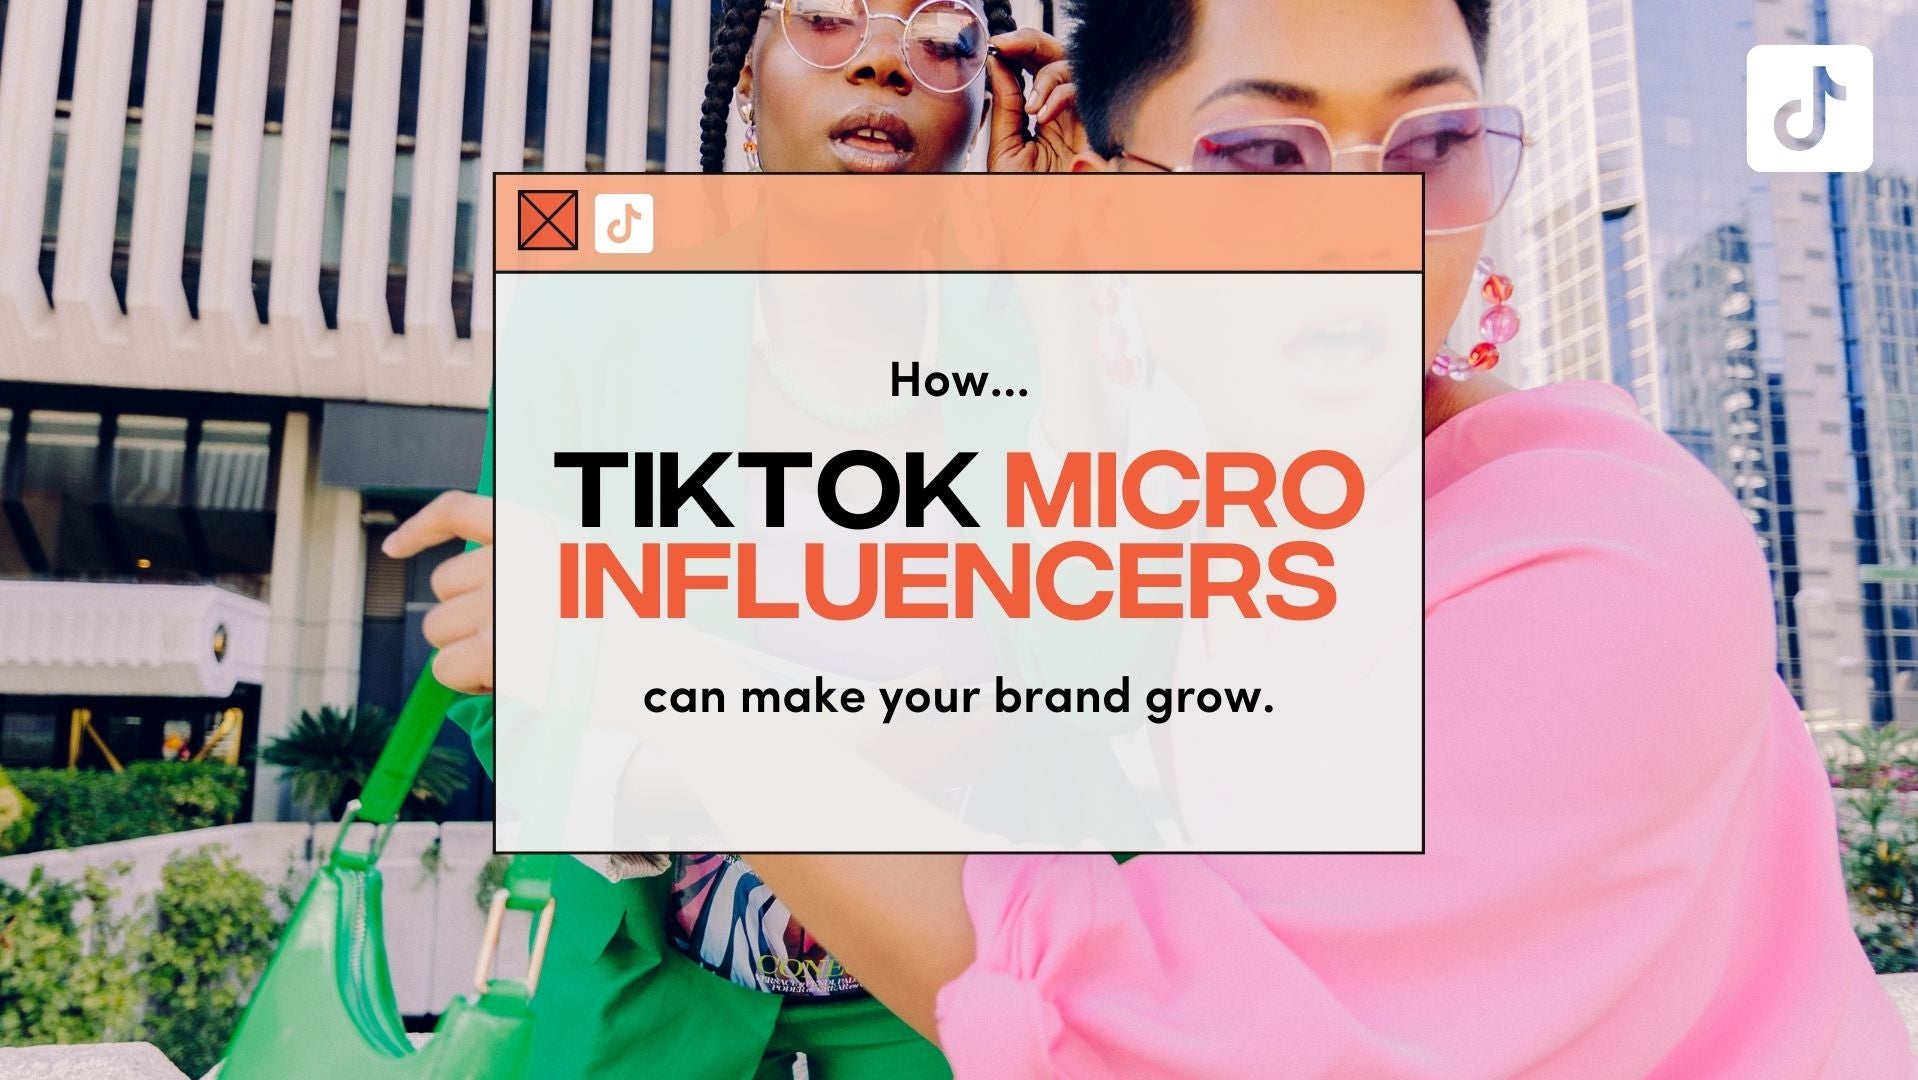 how to make your flowers bloom｜TikTok Search